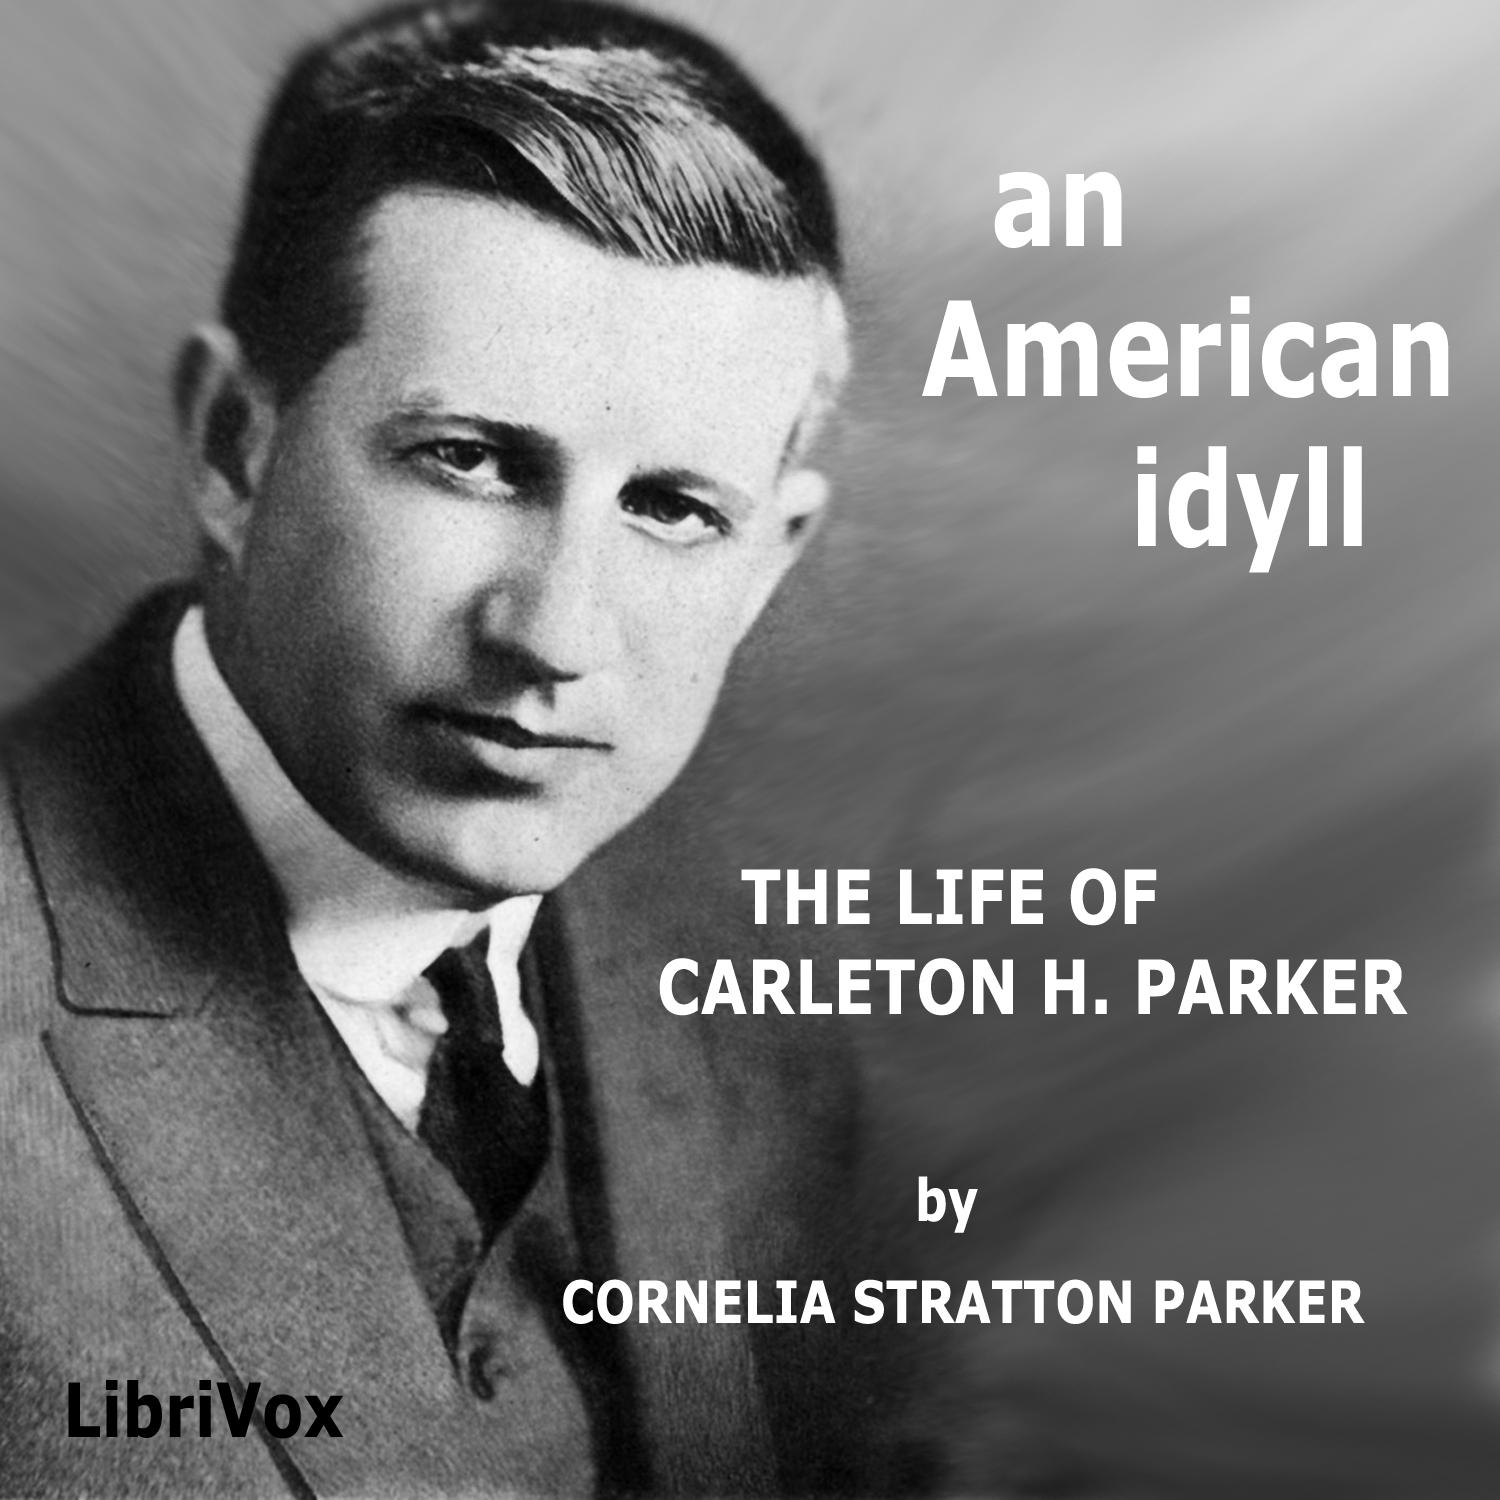 An American Idyll: The Life of Carlton H. Parker, #7 - Chapter VI